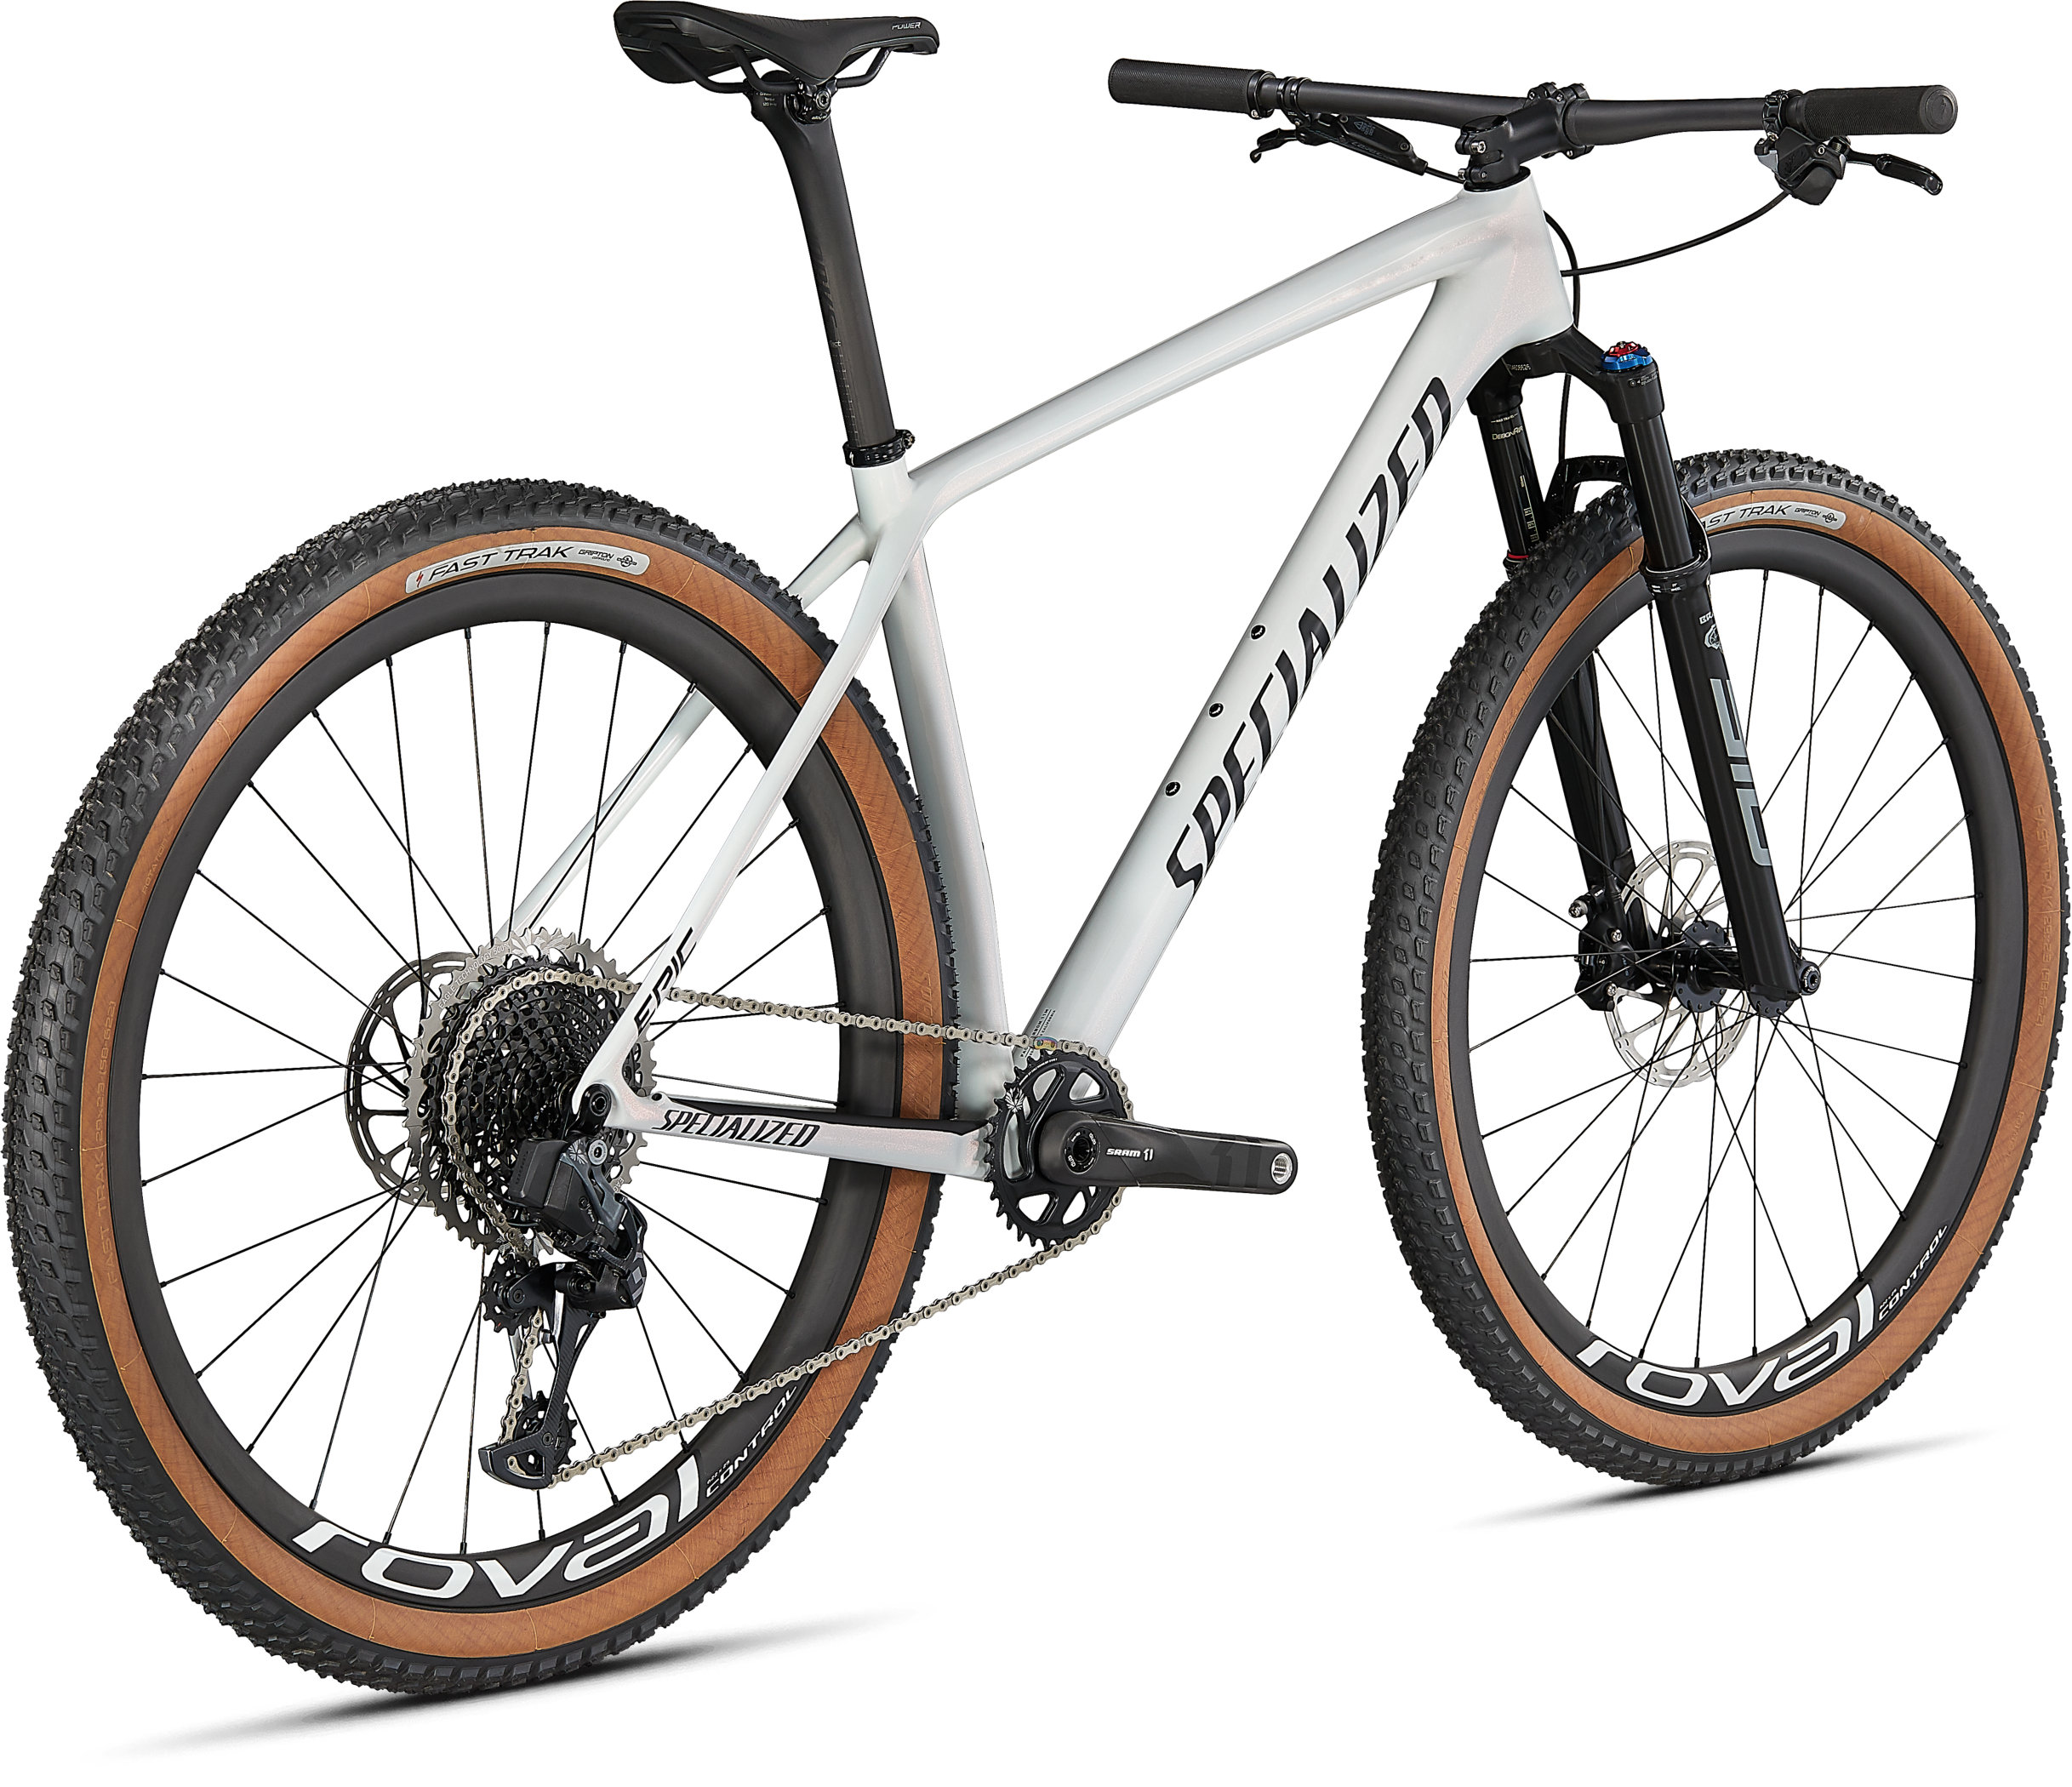 2019 specialized epic hardtail pro